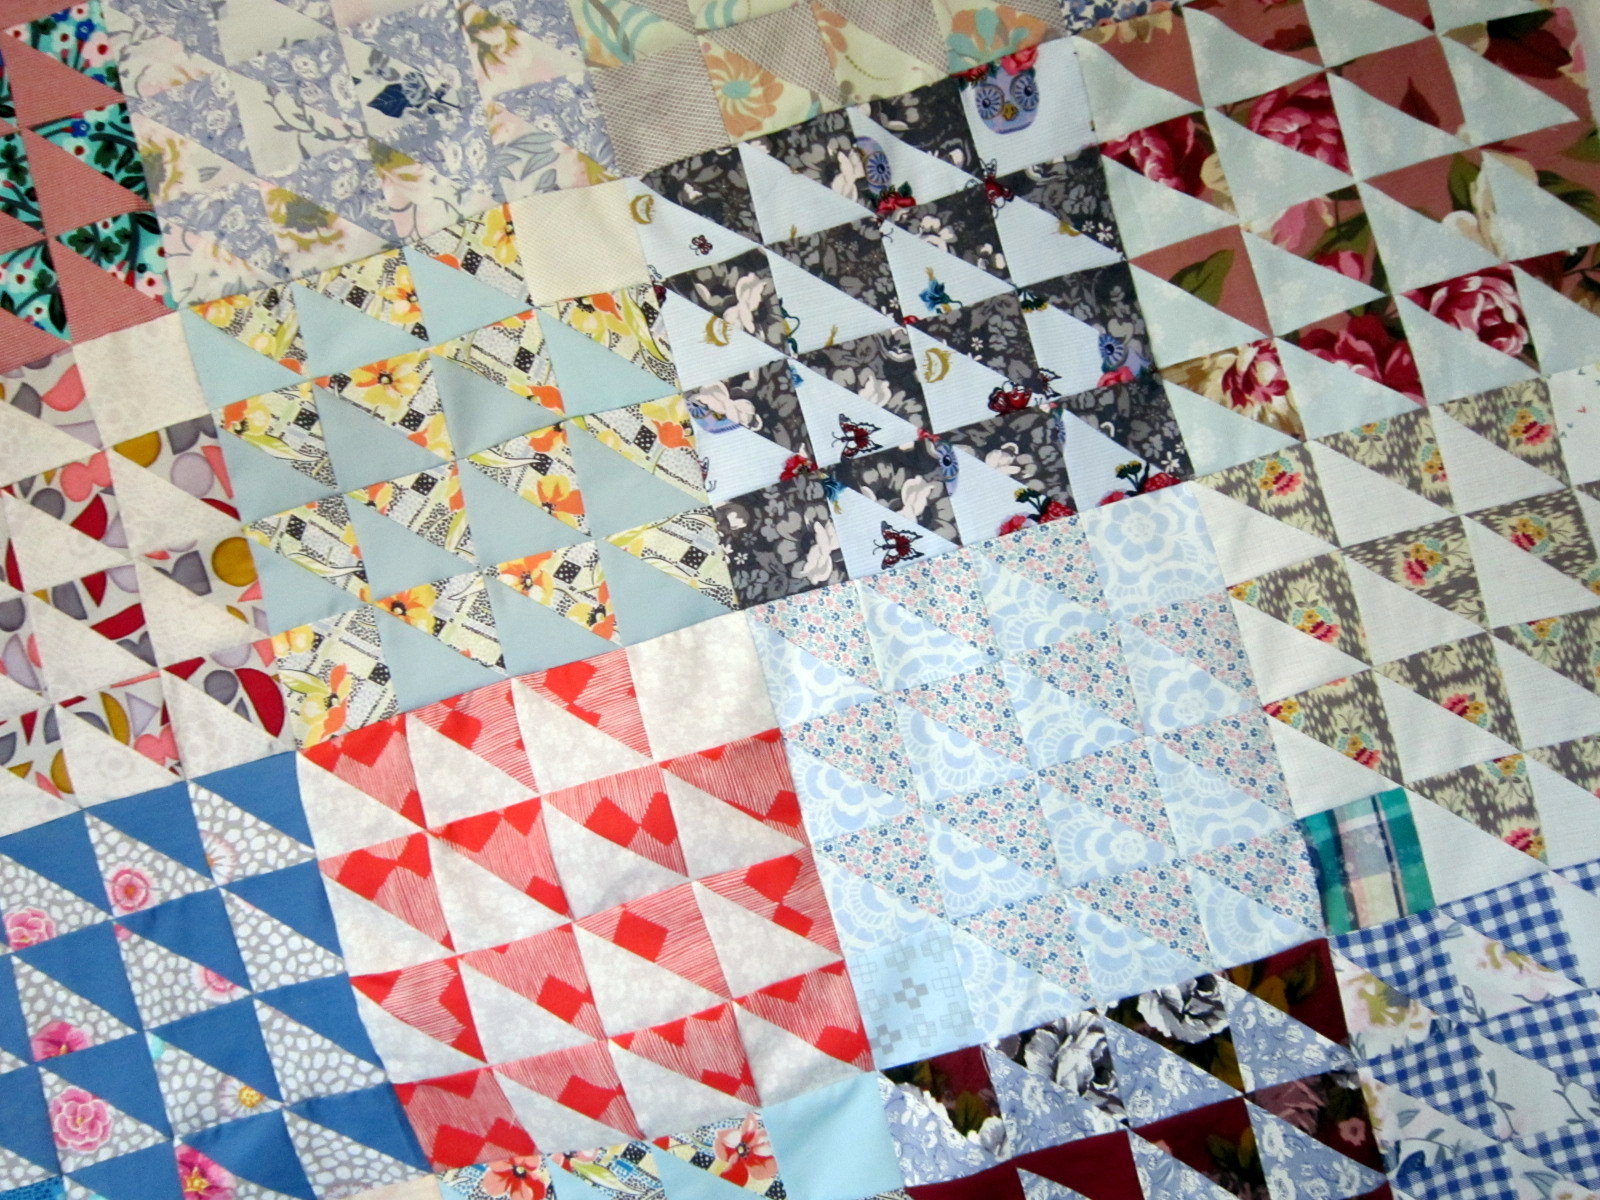 Kokaquilts: back working on 'triangle tiles'